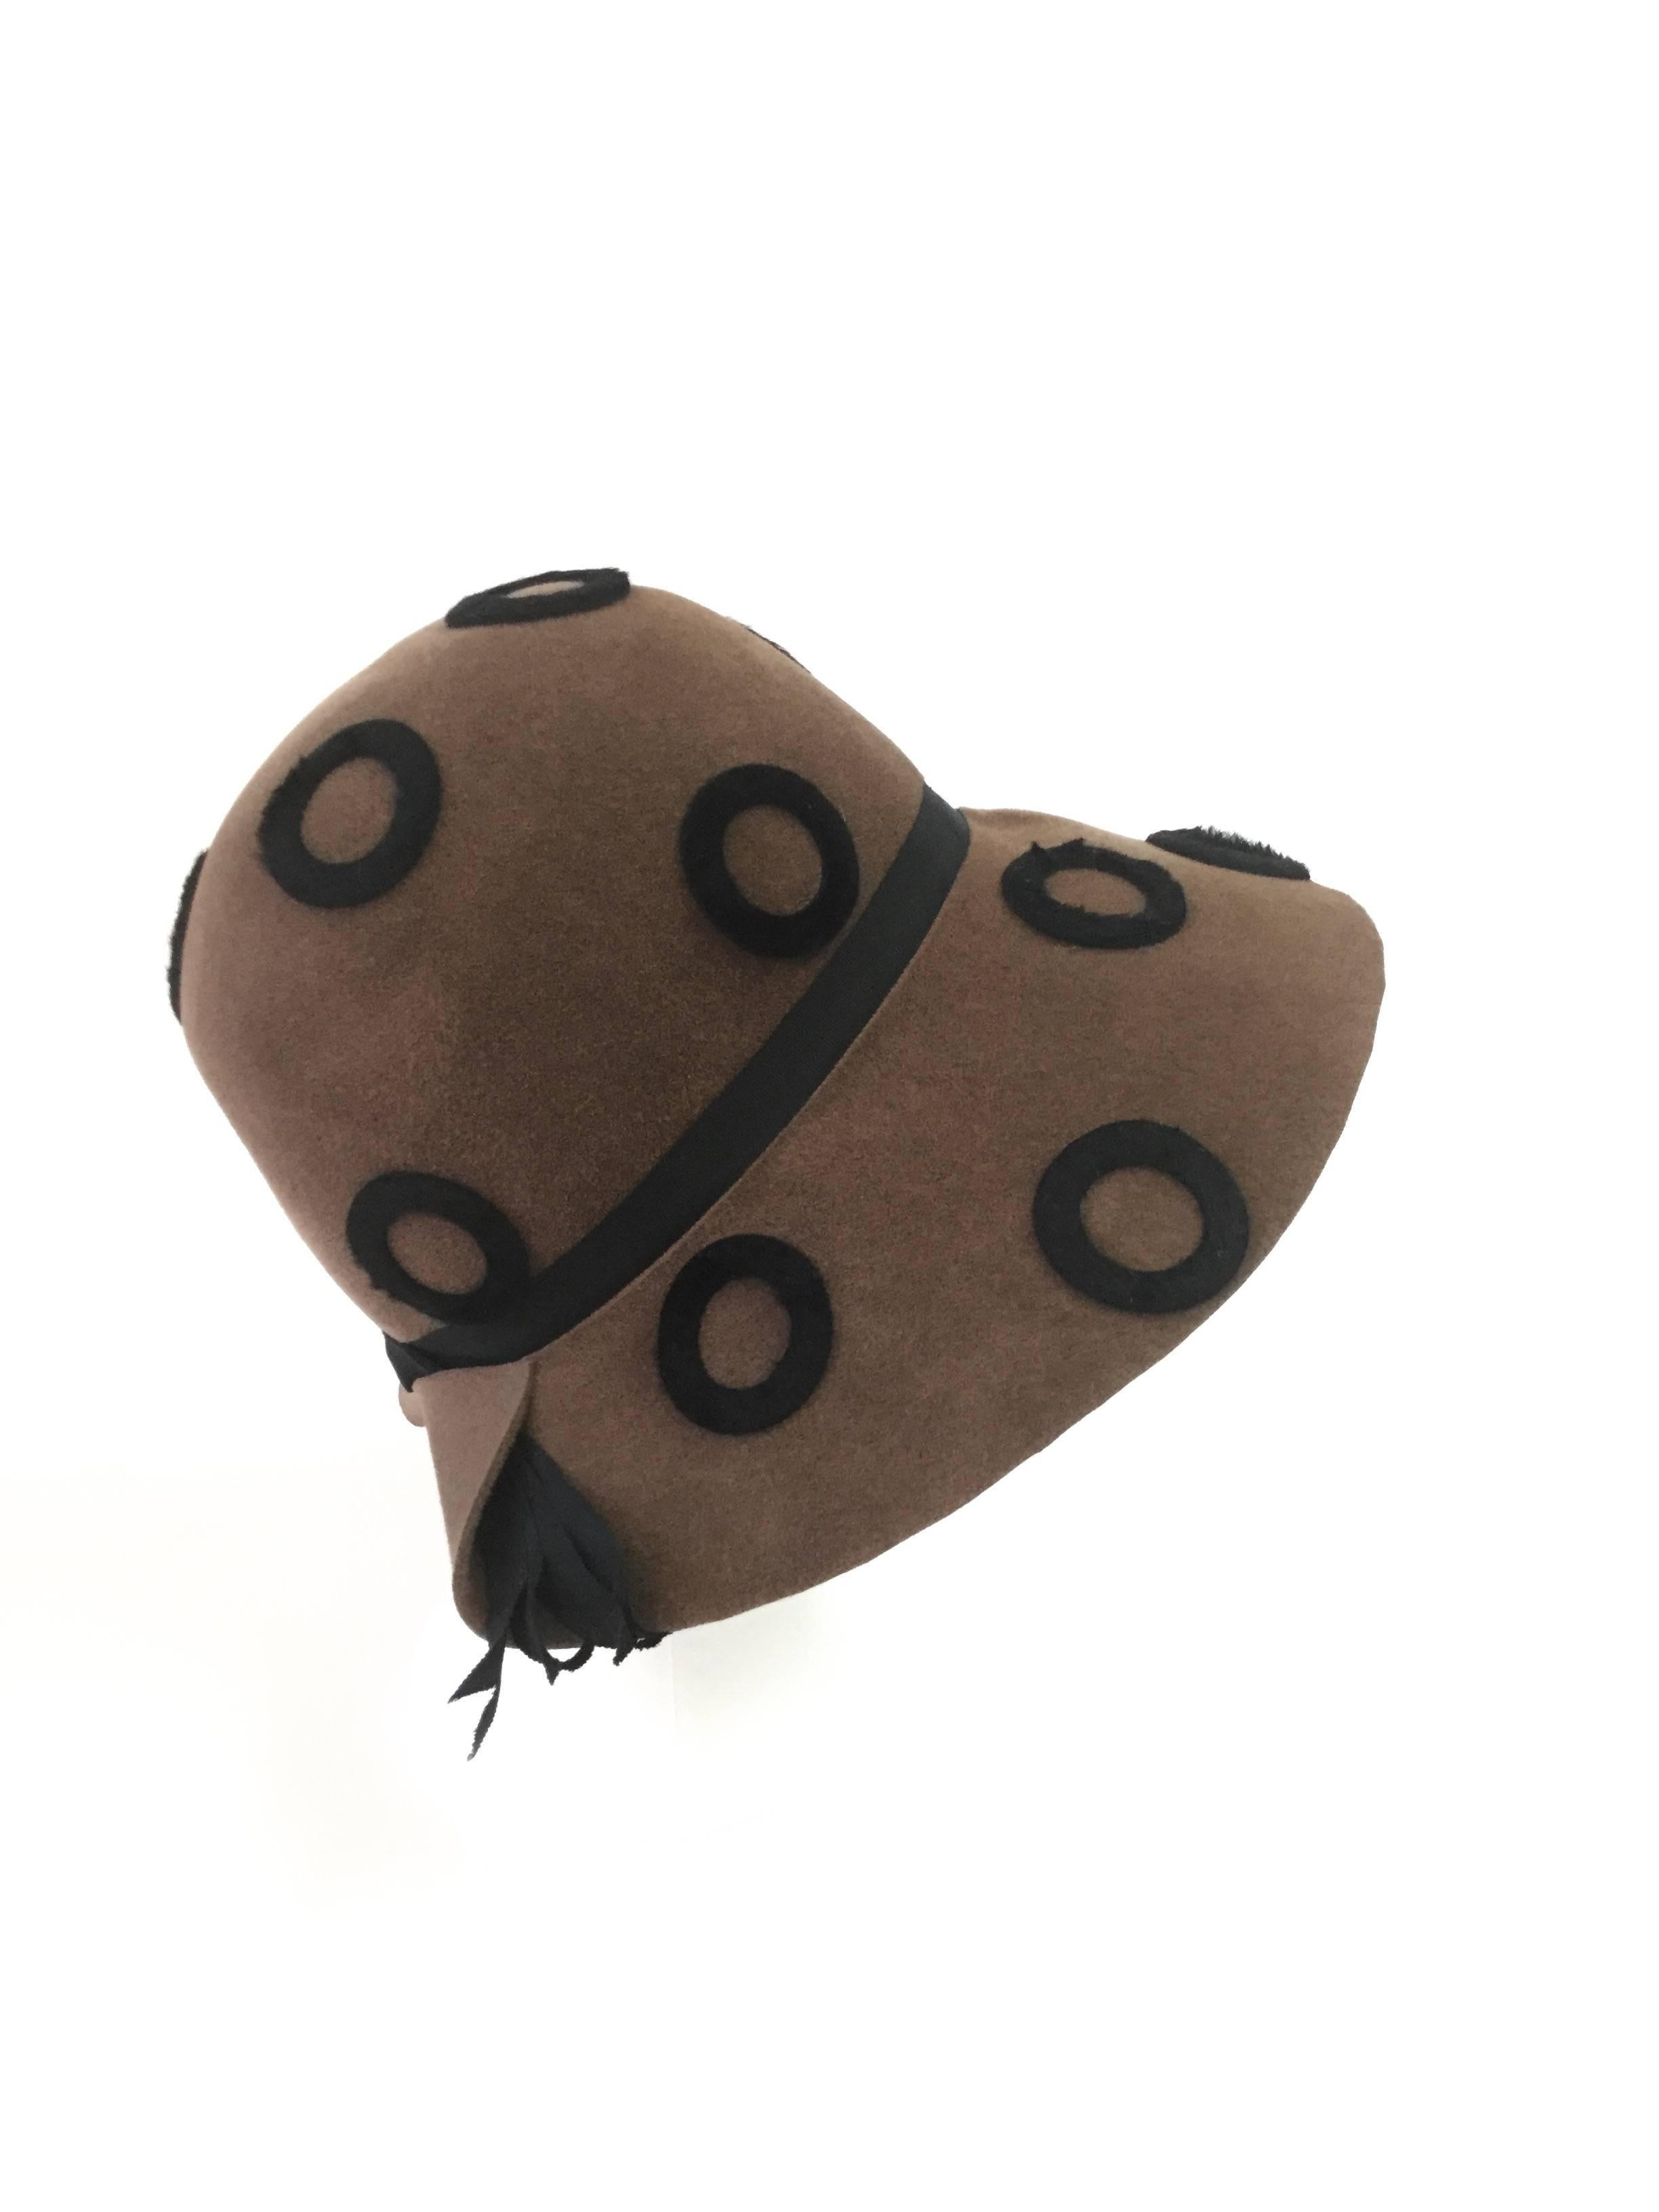 
This fantastic bohemian felt hat by Miss Carnegie by Hattie Carnegie has a rounded crown and a distinctive folded notch at the back of the wide brim. The hat features a polkadot pattern throughout, a thin grosgrain ribbon at the base of the crown,